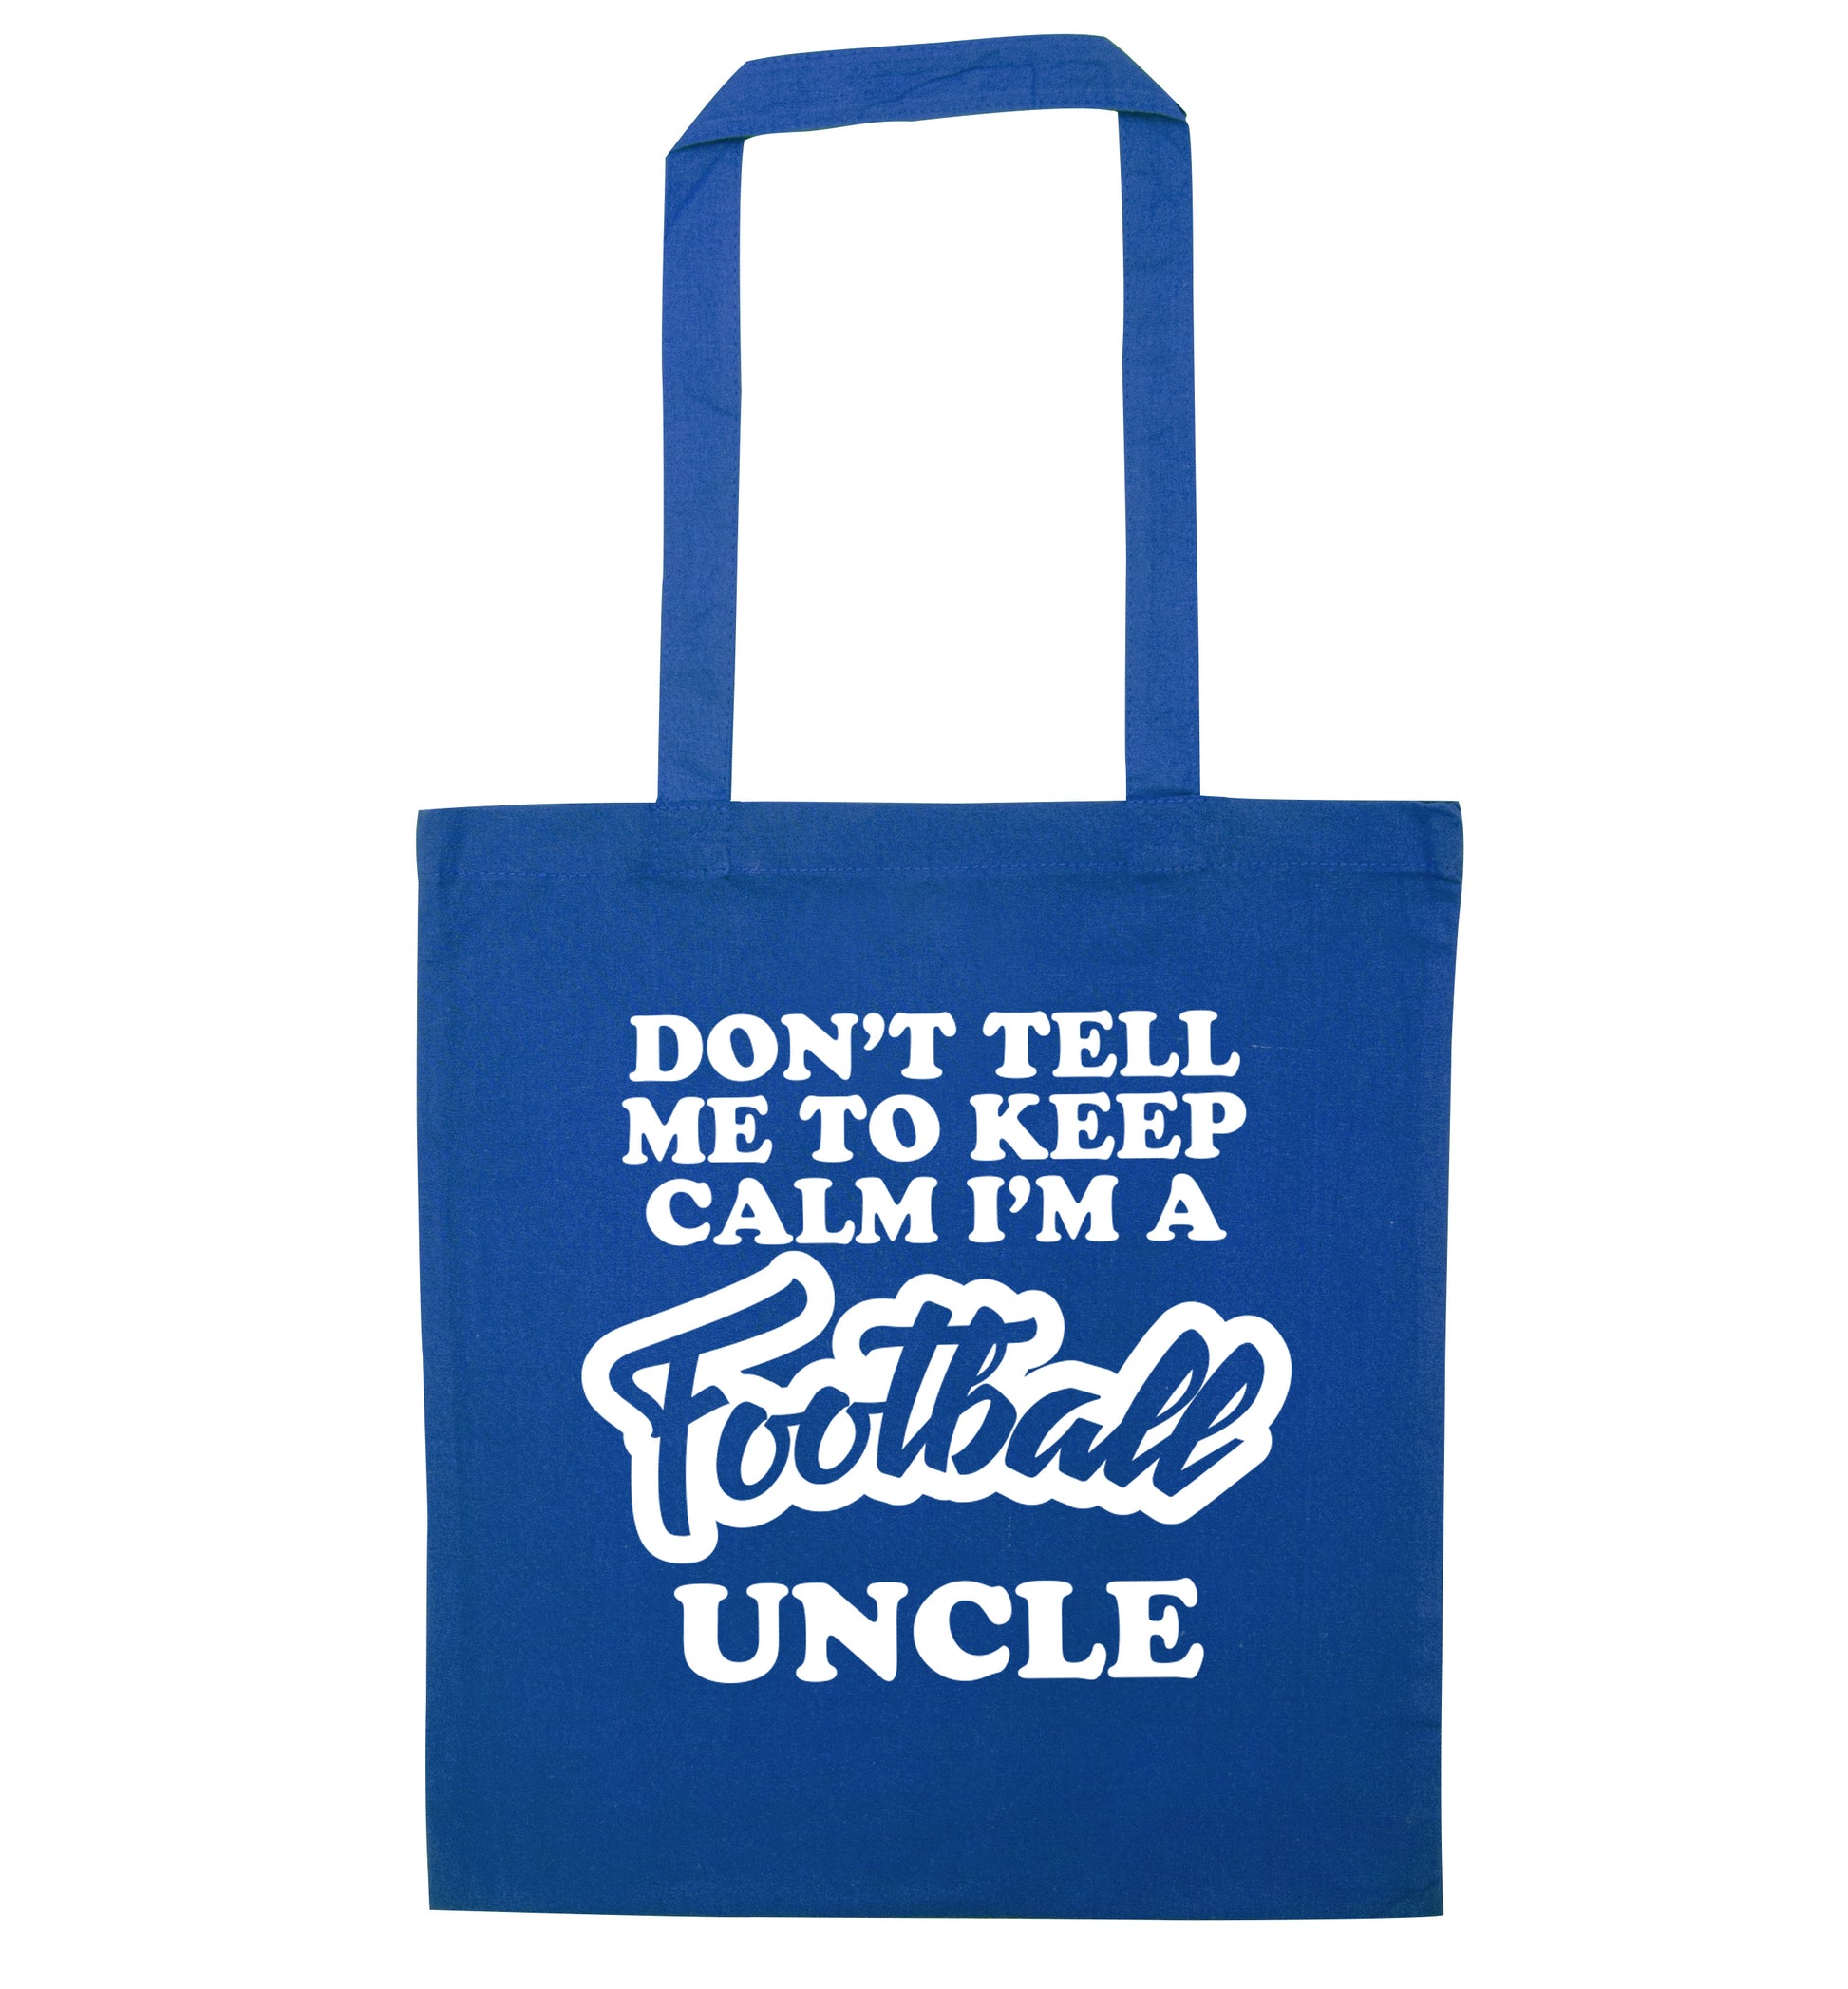 Don't tell me to keep calm I'm a football uncle blue tote bag